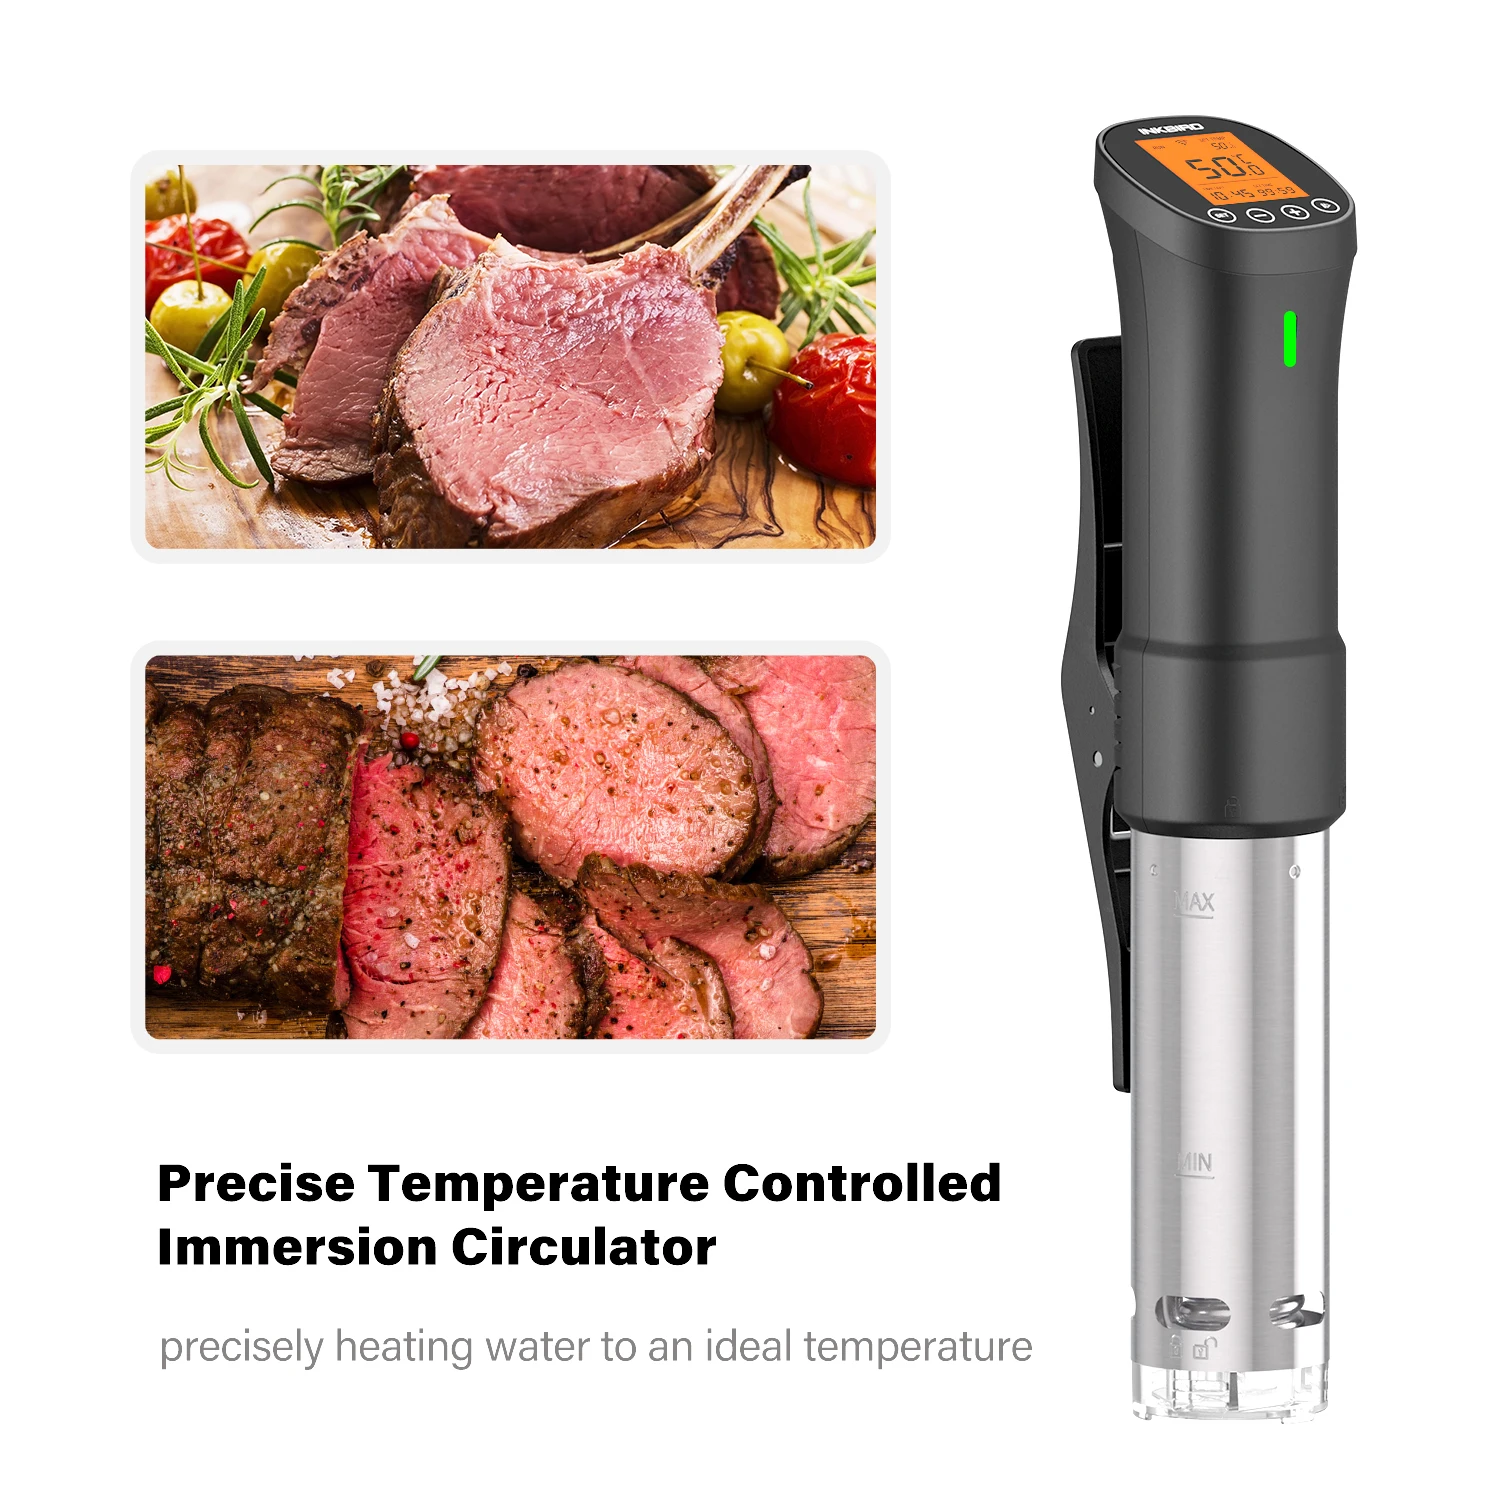 11l sous vide cooker container and stainless steel sous vide rack sets detachable dividers separator for immersion circulator INKBIRD WIFI Sous-vide Vacuum Cooker Stew Electric Pot Immersion Circulator Stainless Steel Durable Thermal Heater Slow Cooker